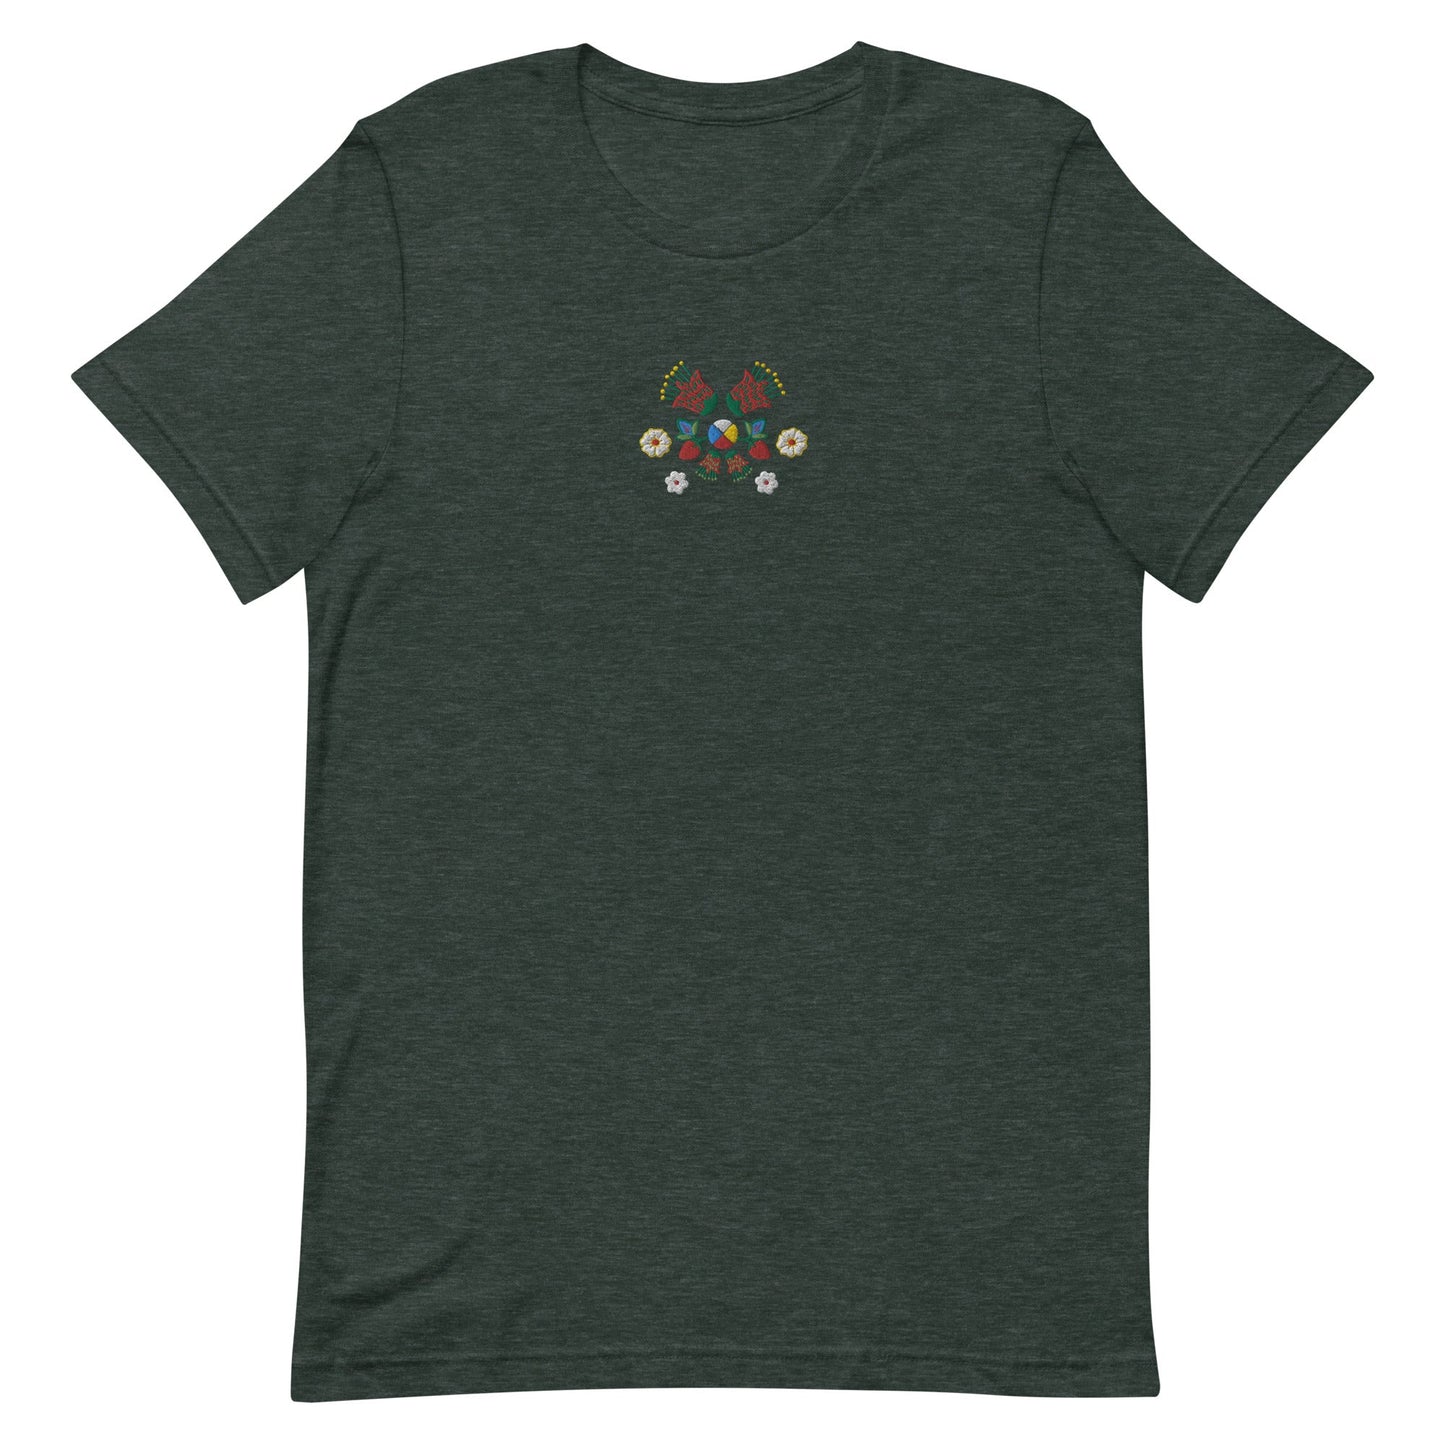 Plus Size Native Floral Embroidered T-shirt - Nikikw Designs